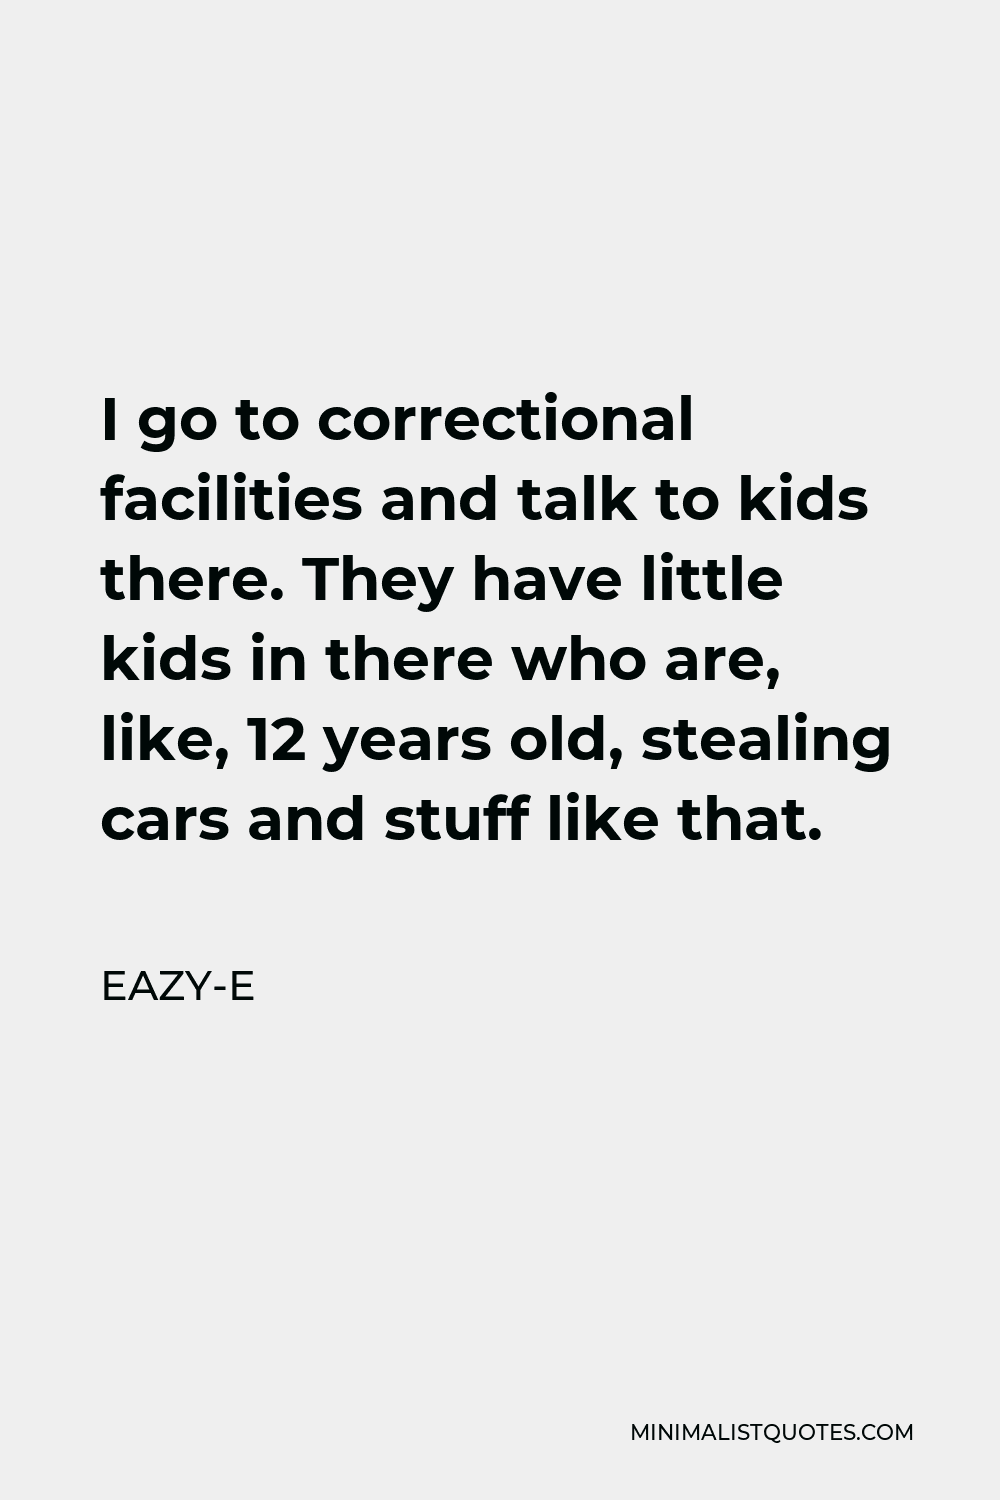 Eazy-E Quote - I go to correctional facilities and talk to kids there. They have little kids in there who are, like, 12 years old, stealing cars and stuff like that.